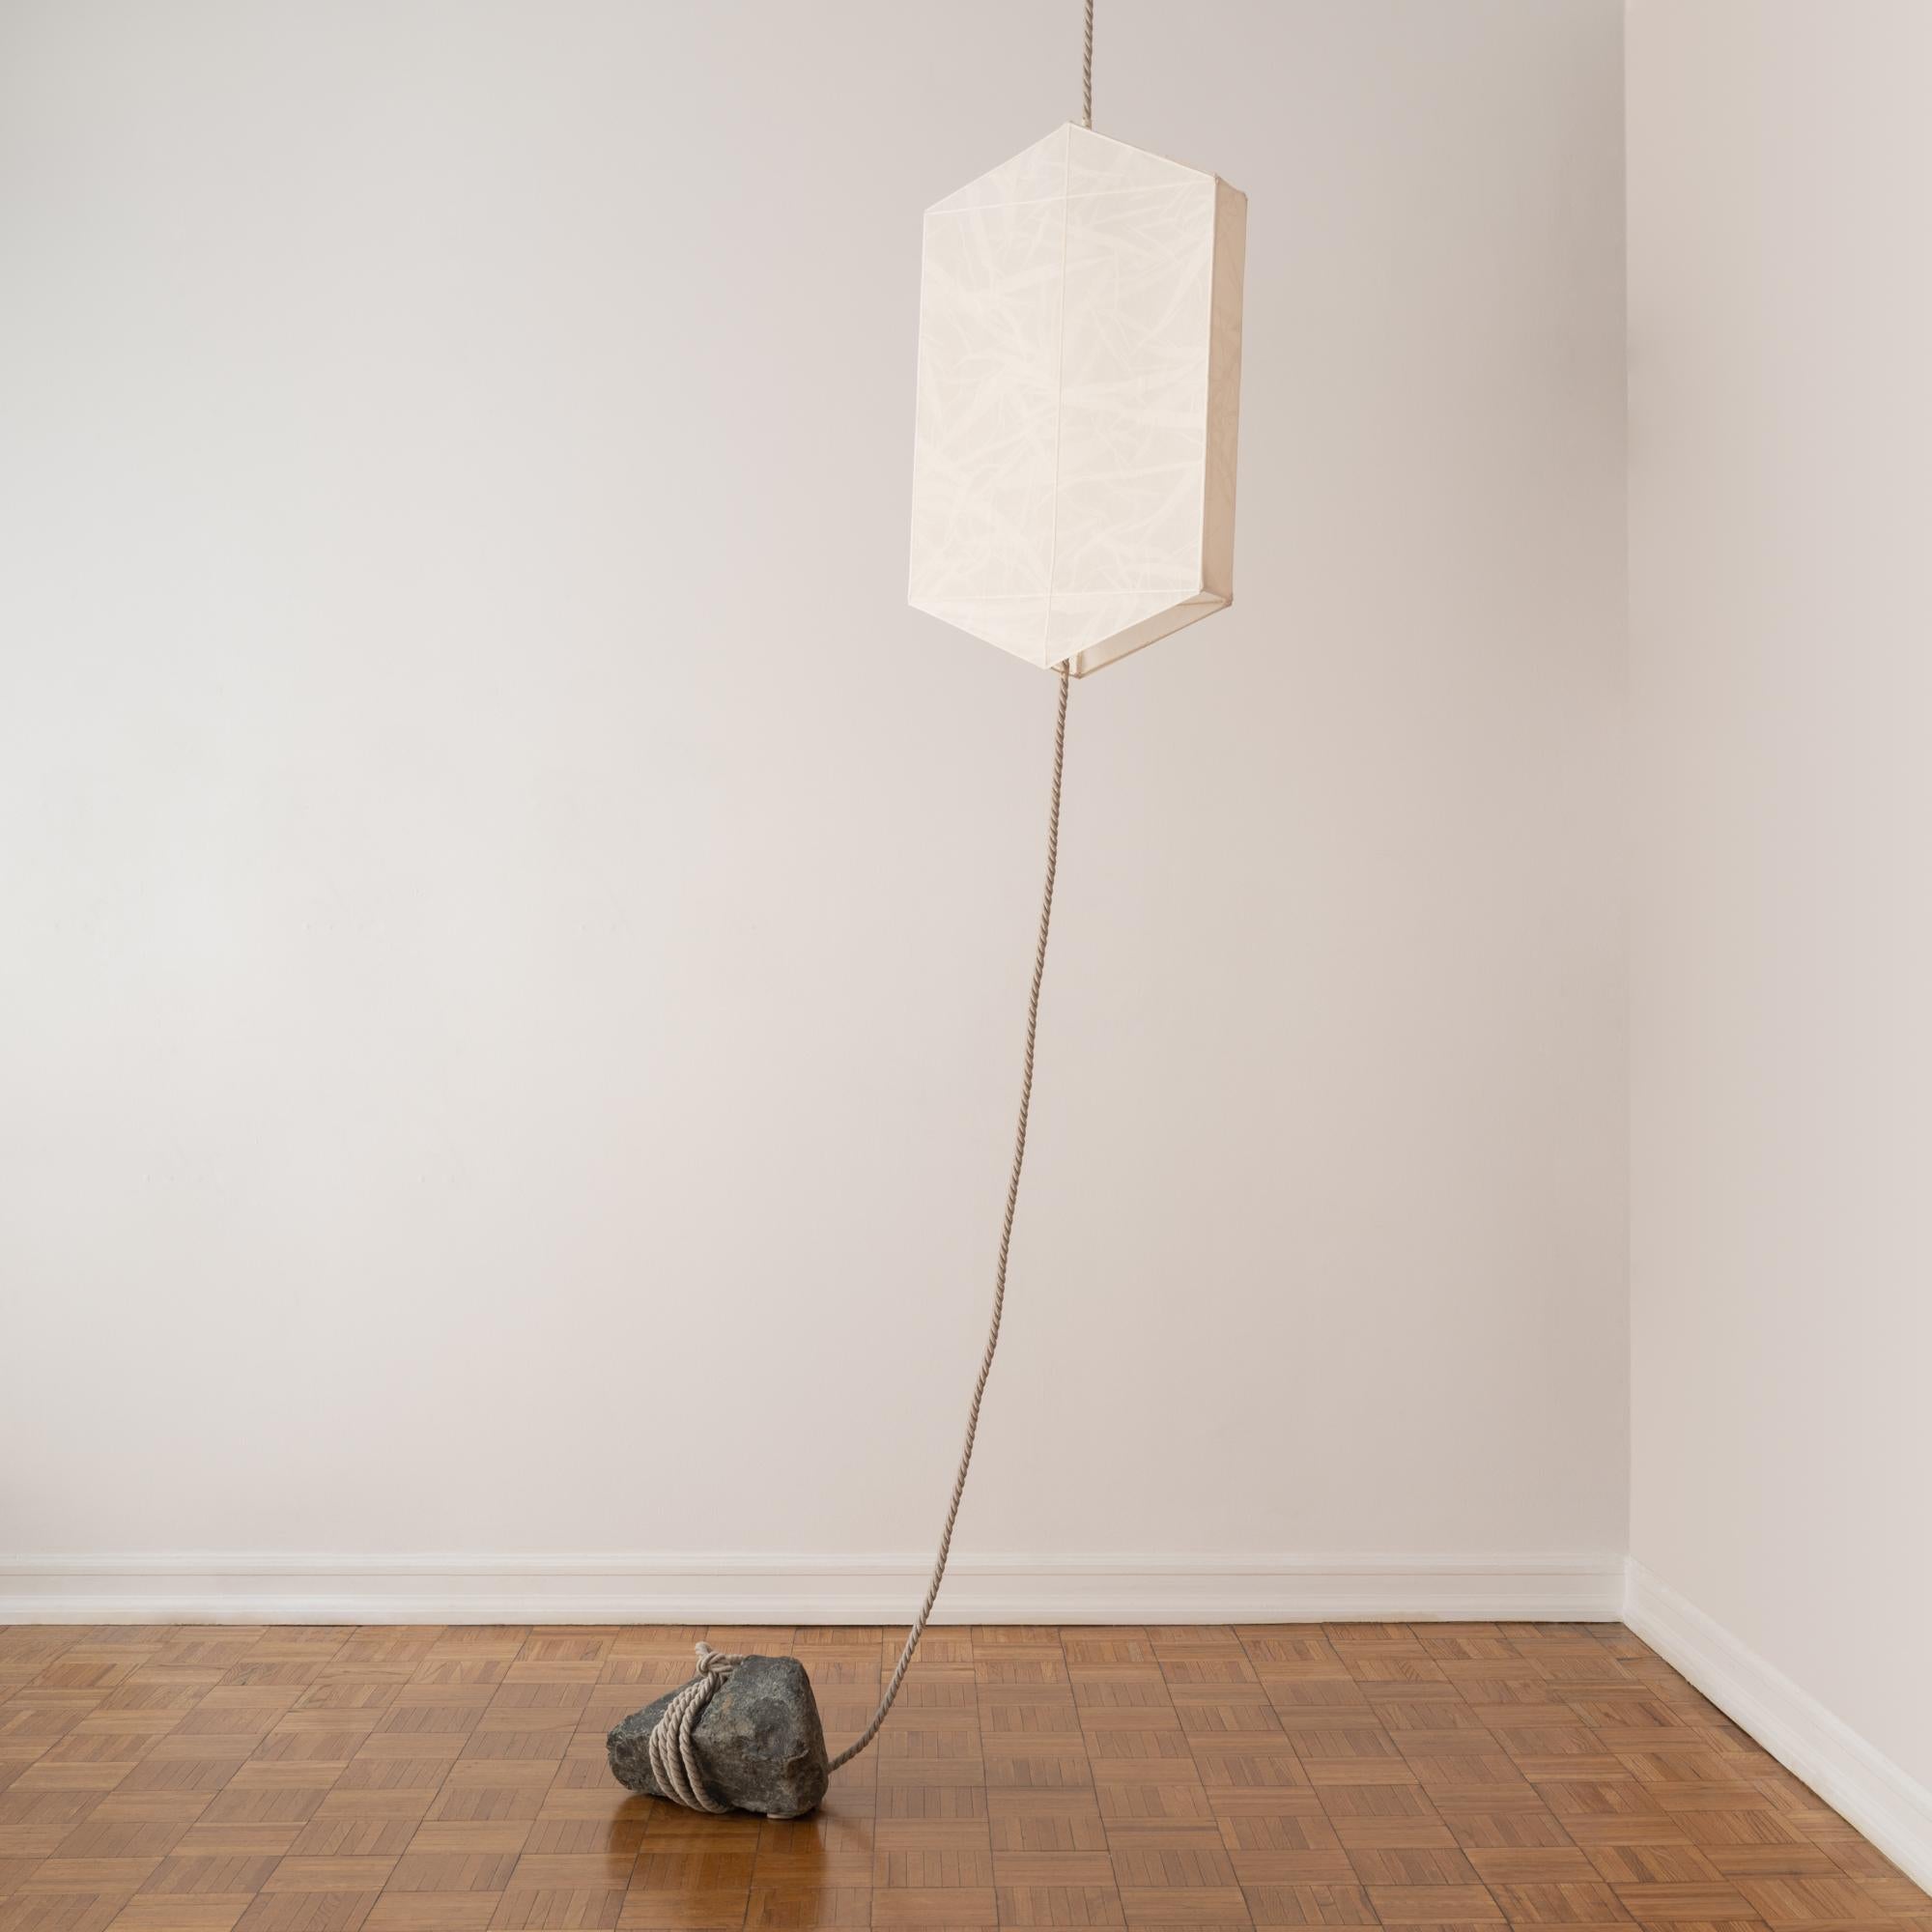 American One-of-a-Kind Hanging Lantern-style Lamp in Silk Organza, Rope and Raw Stone For Sale